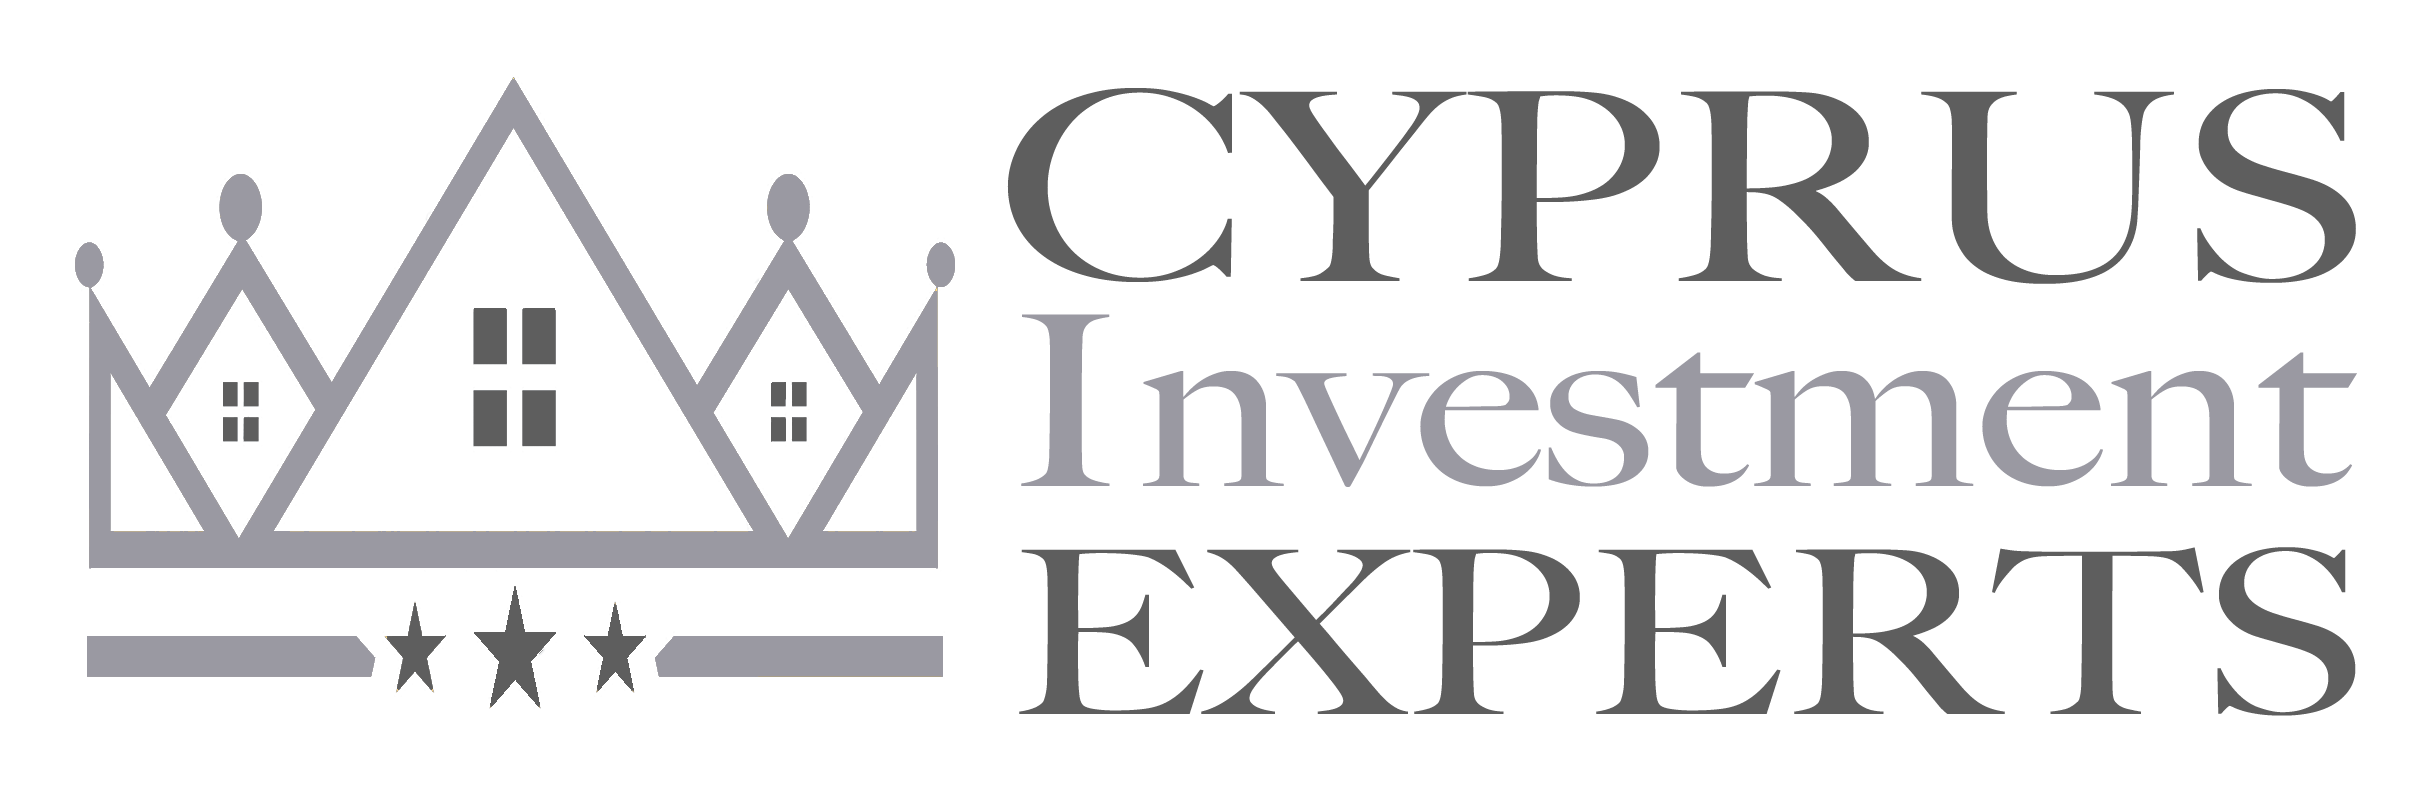 Cyprus Investment Experts